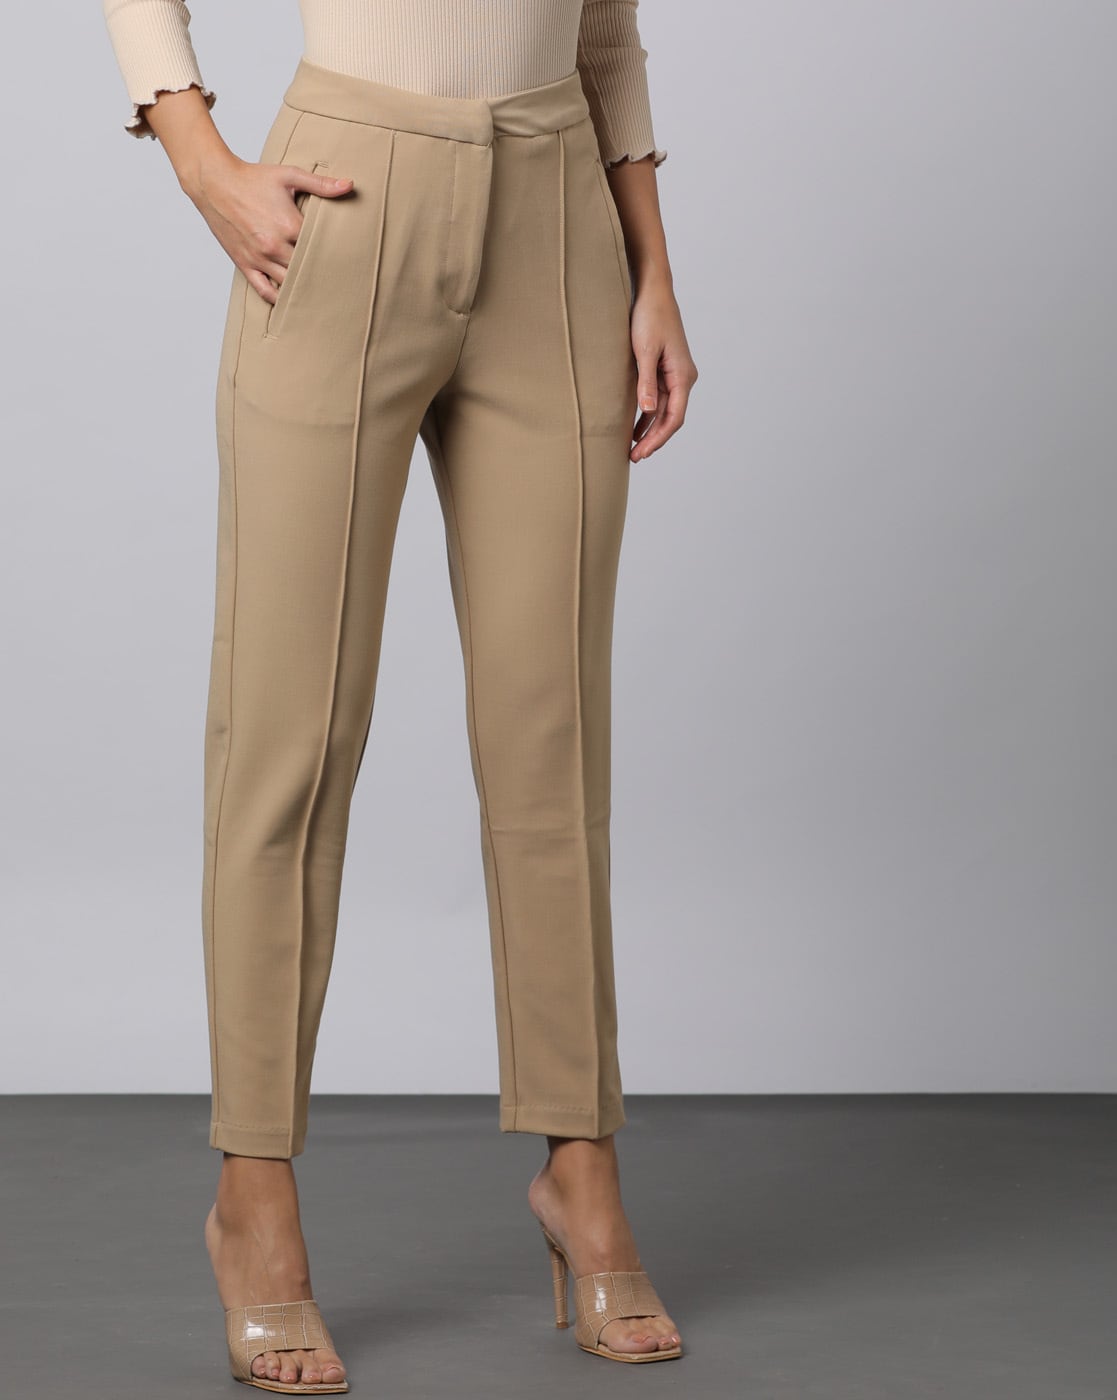 Buy Women Black Striped Paper Bag High Waist Trousers - Trends Online India  - FabAlley